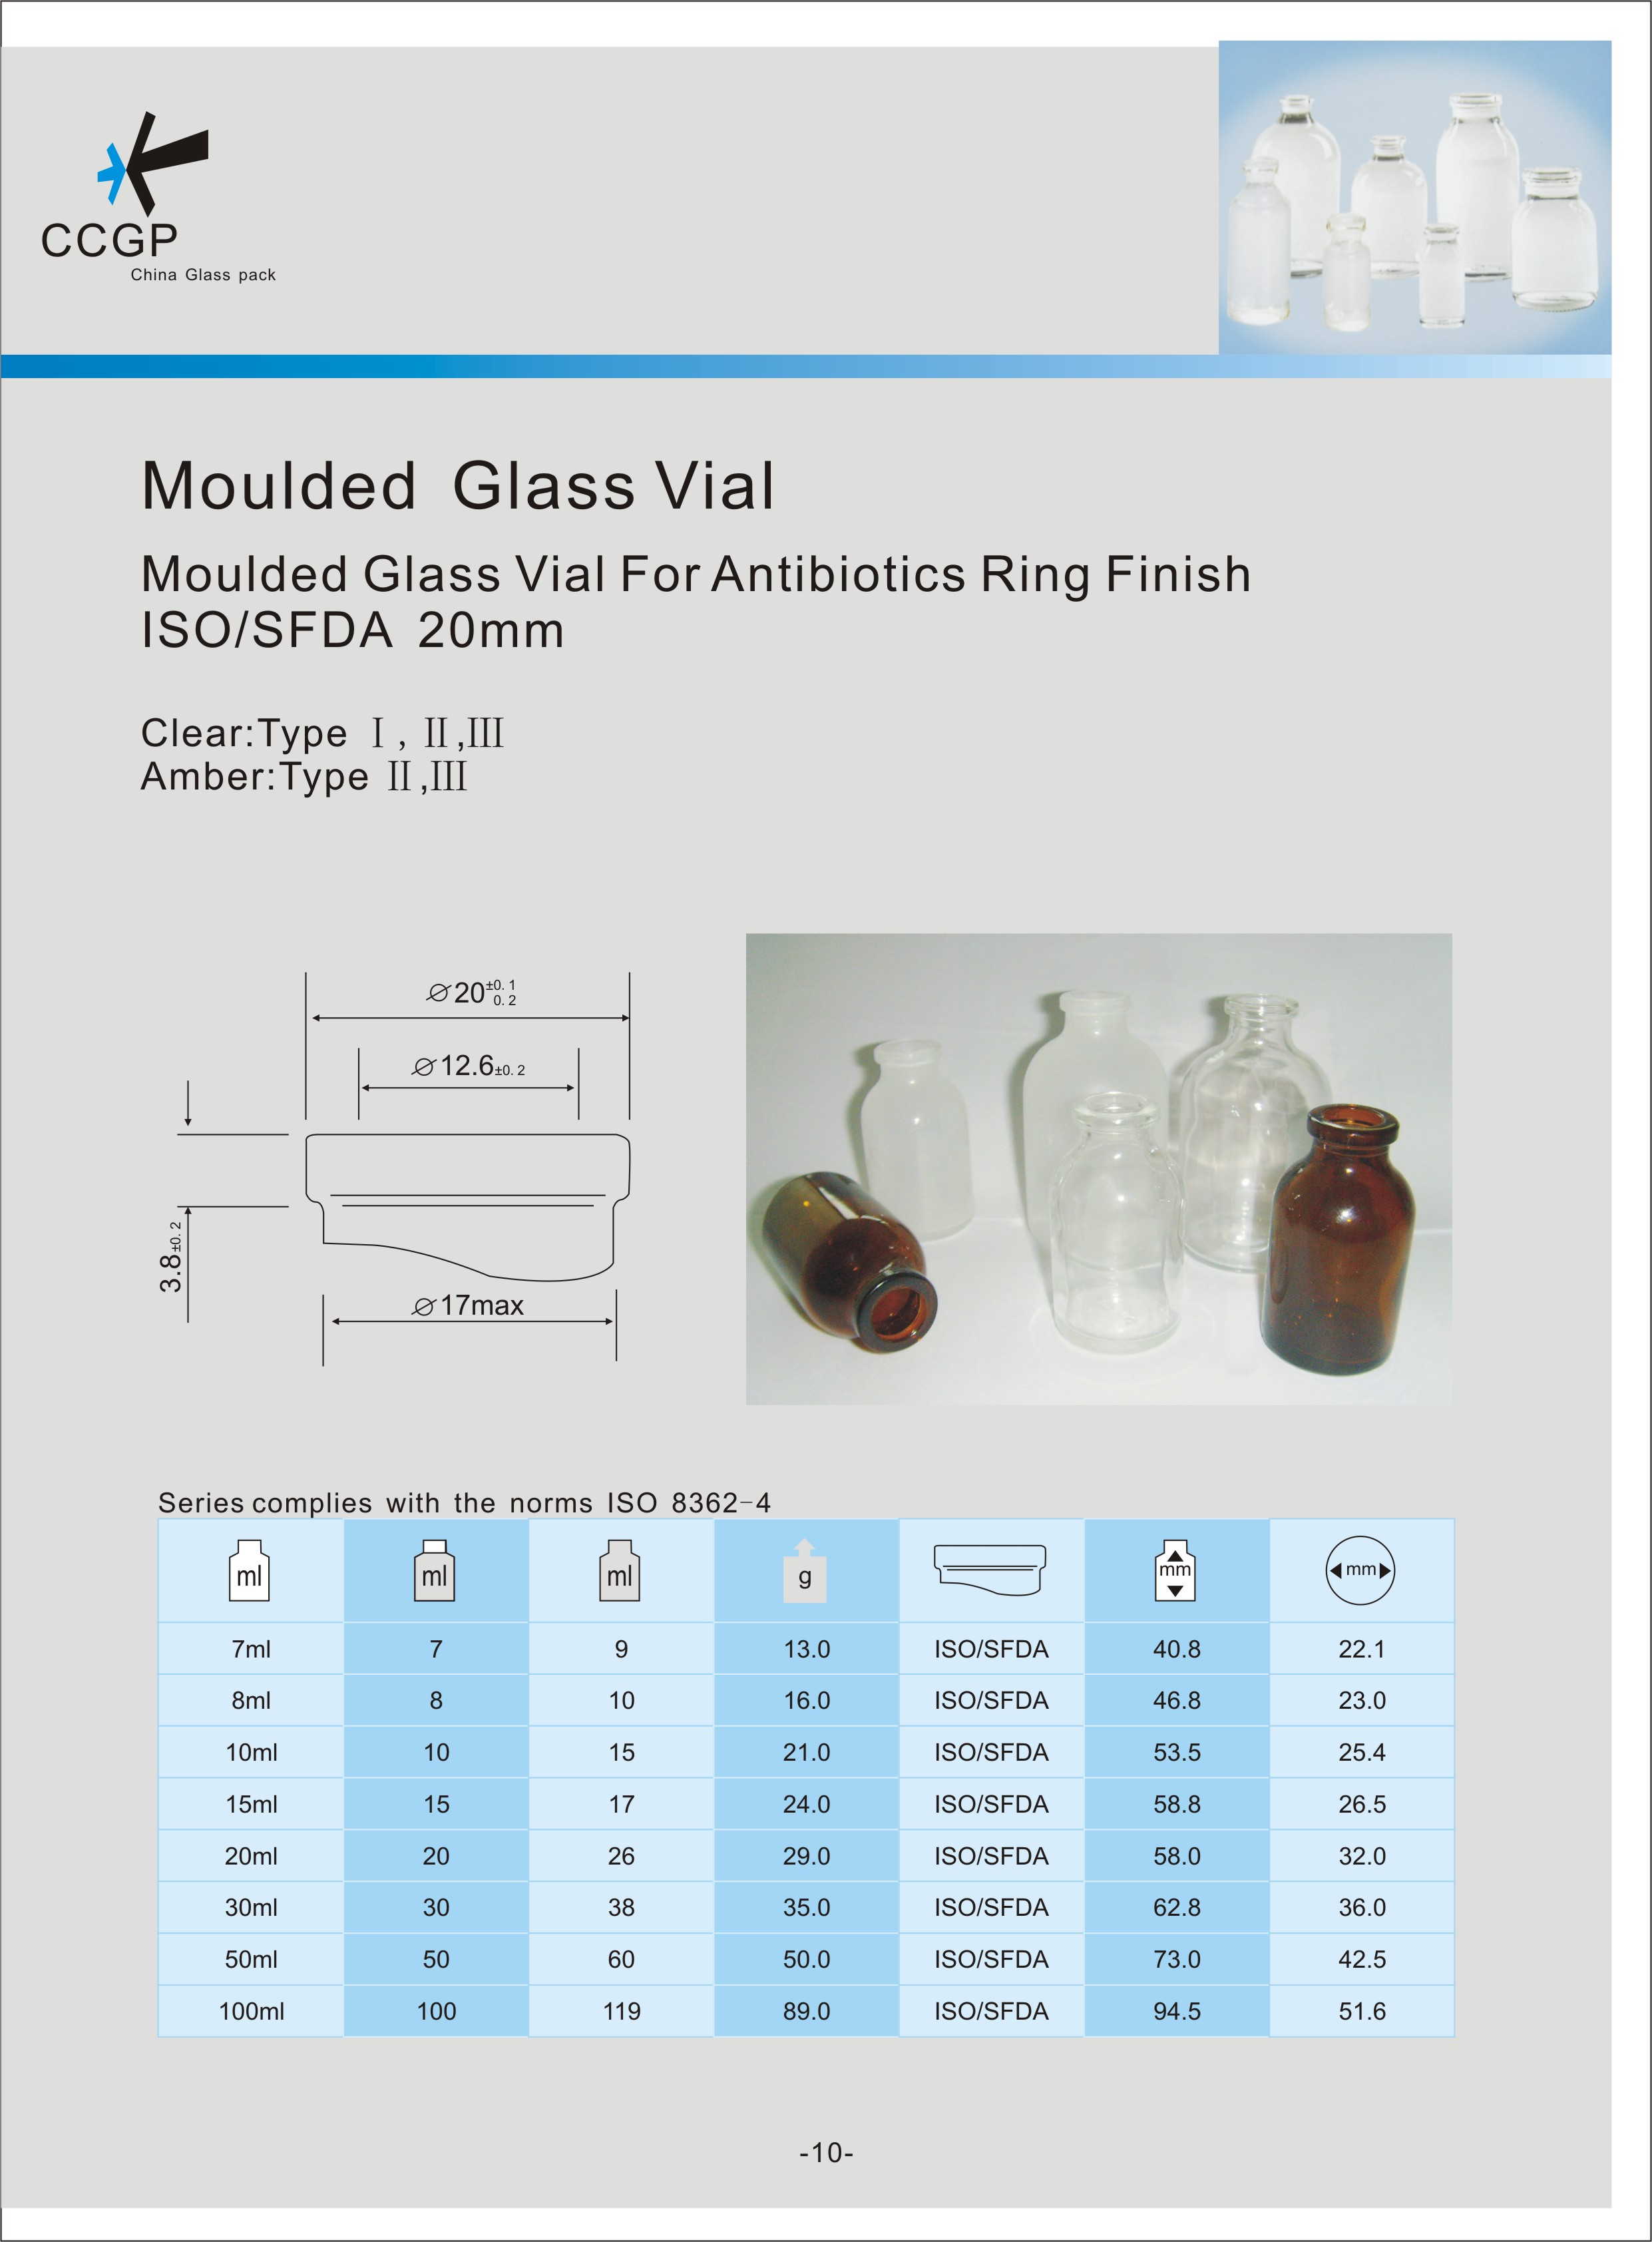 Moulded Injection Vials